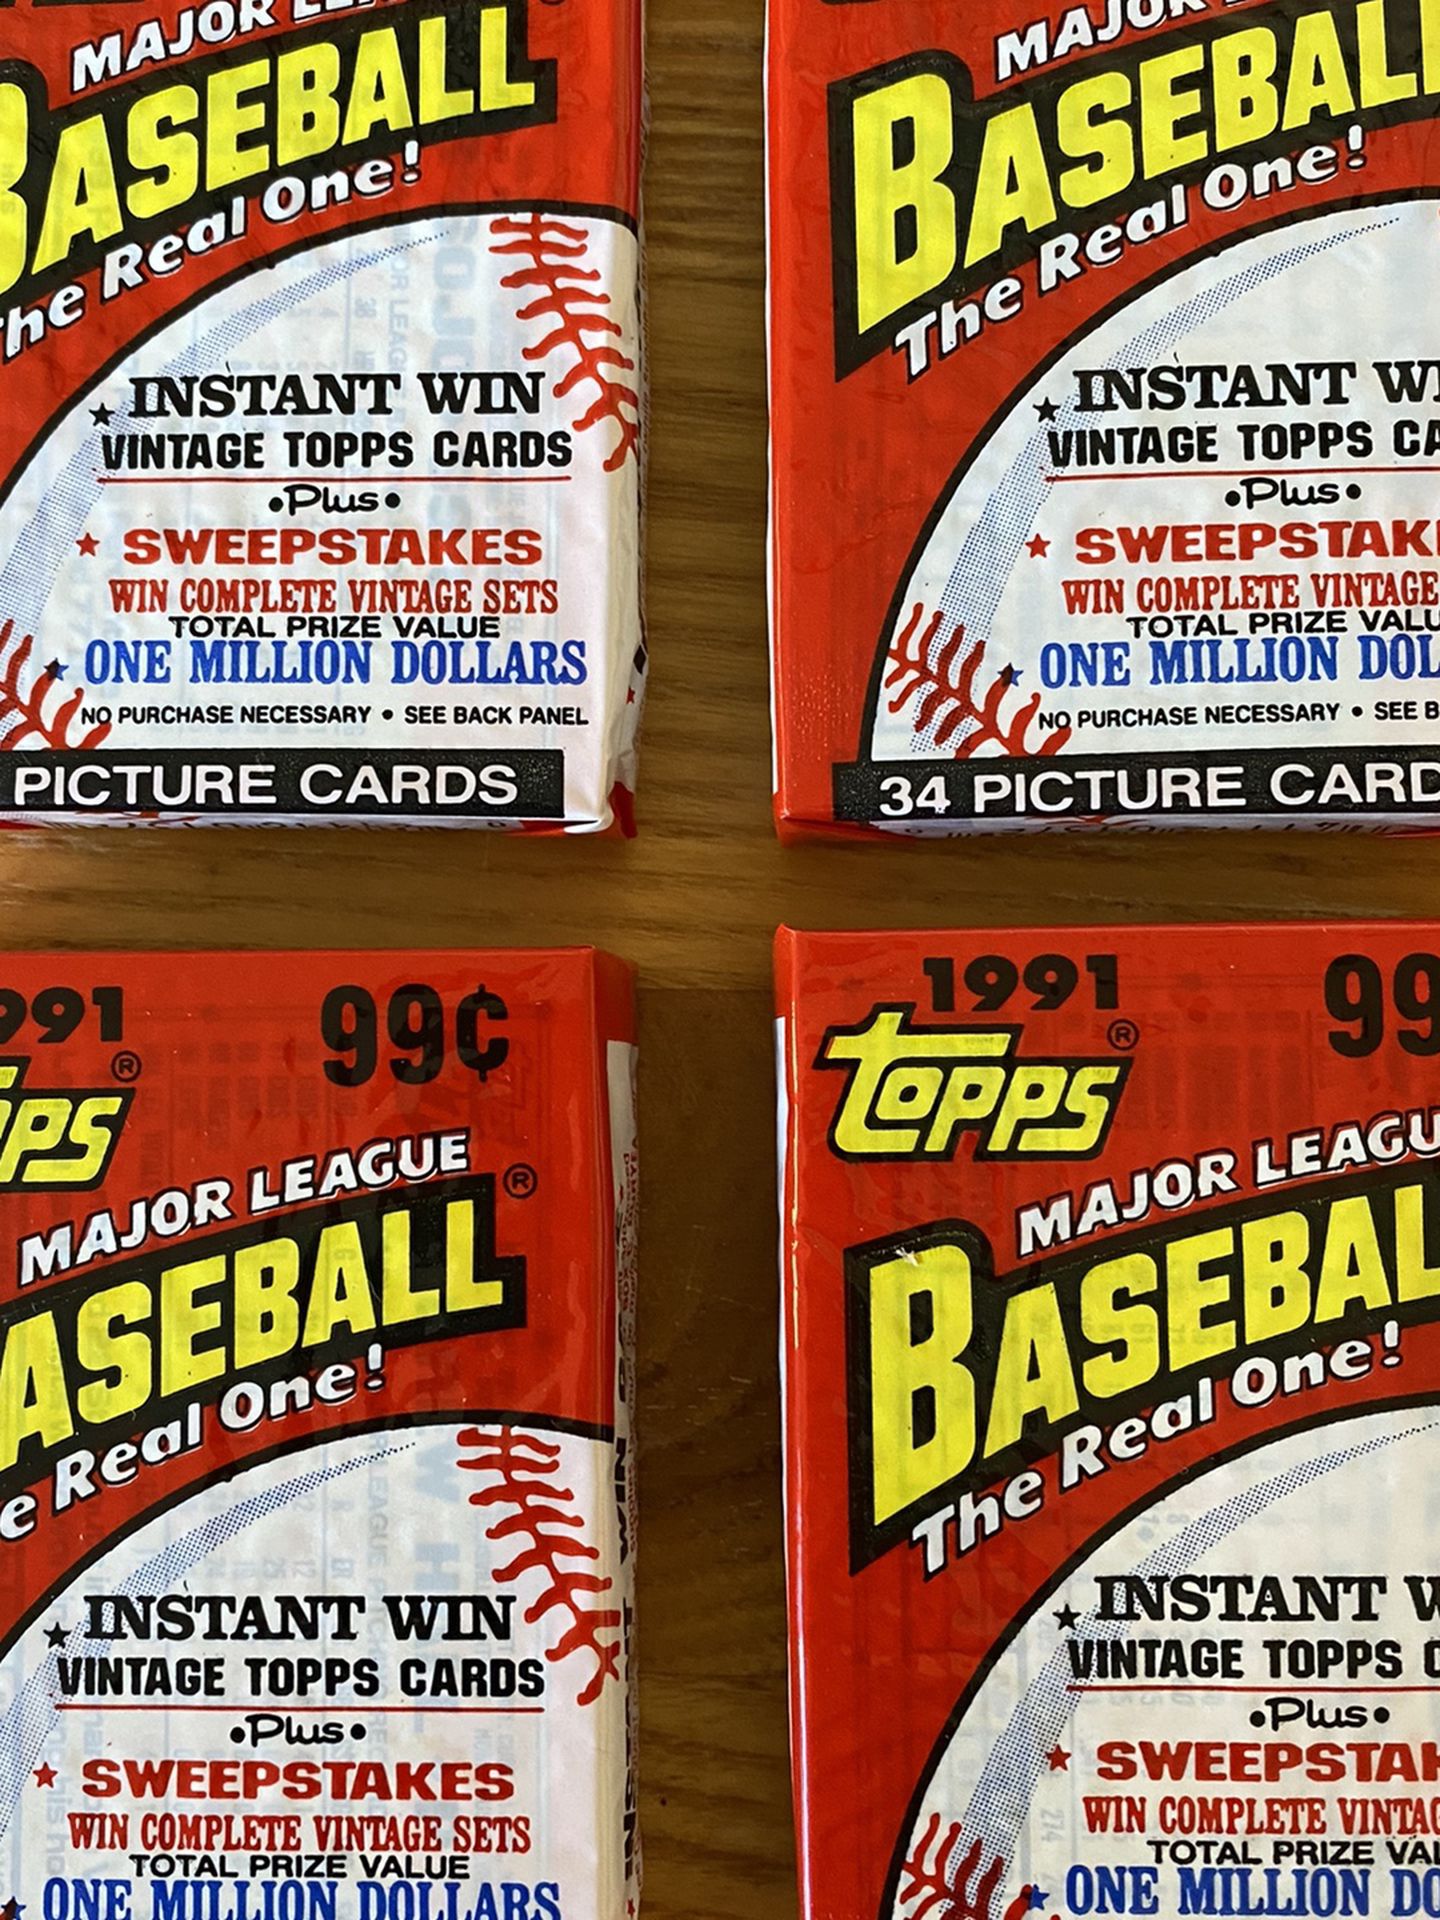 4 New Cello Packs of Topps 1991 Baseball Cards 34 Cards In Each Pack